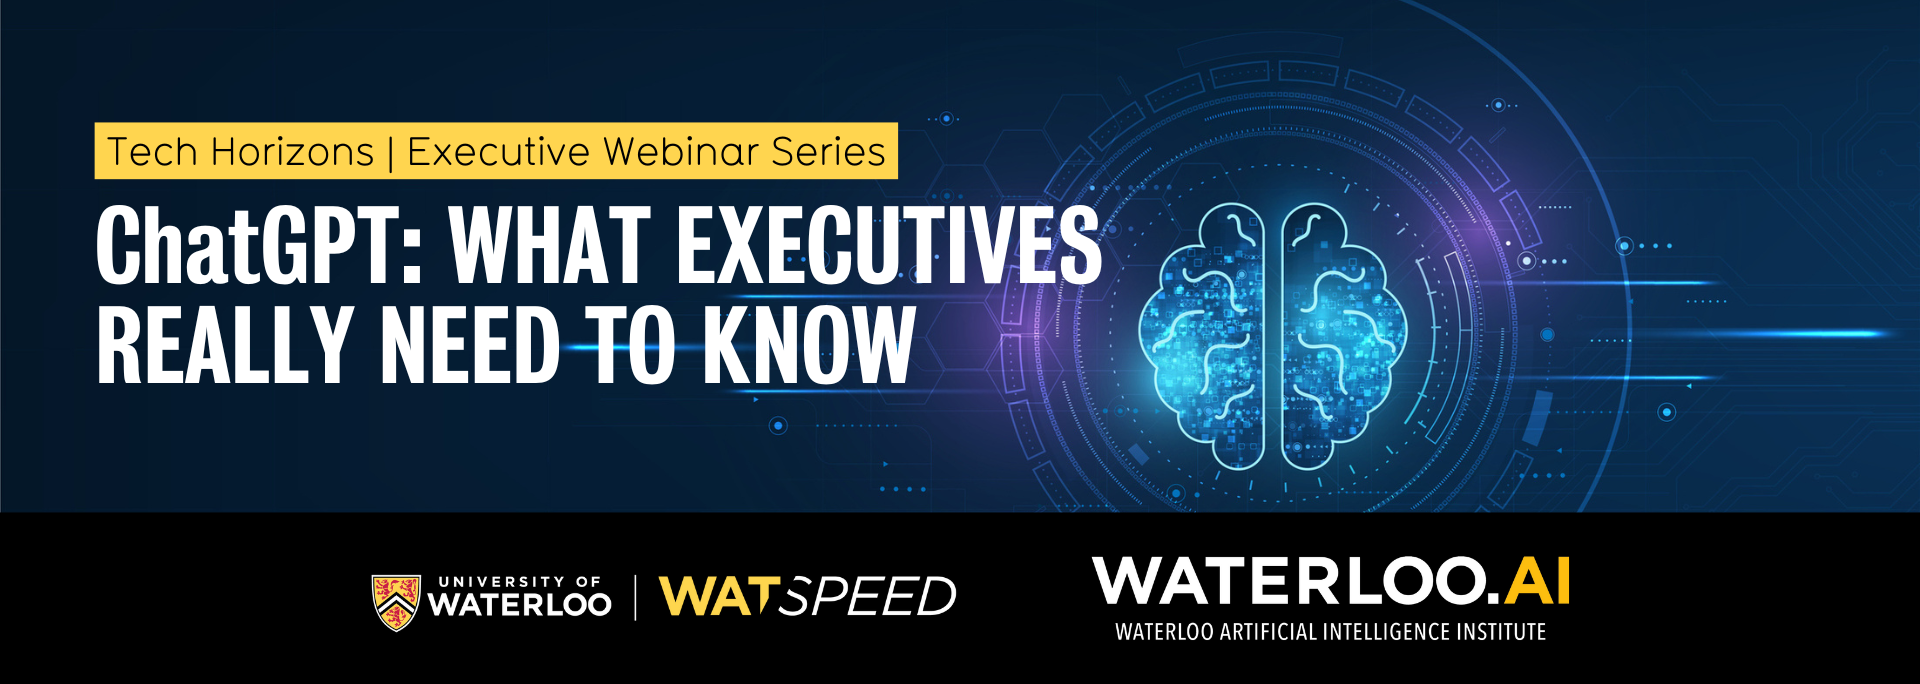  What executives really need to know Executive webinar